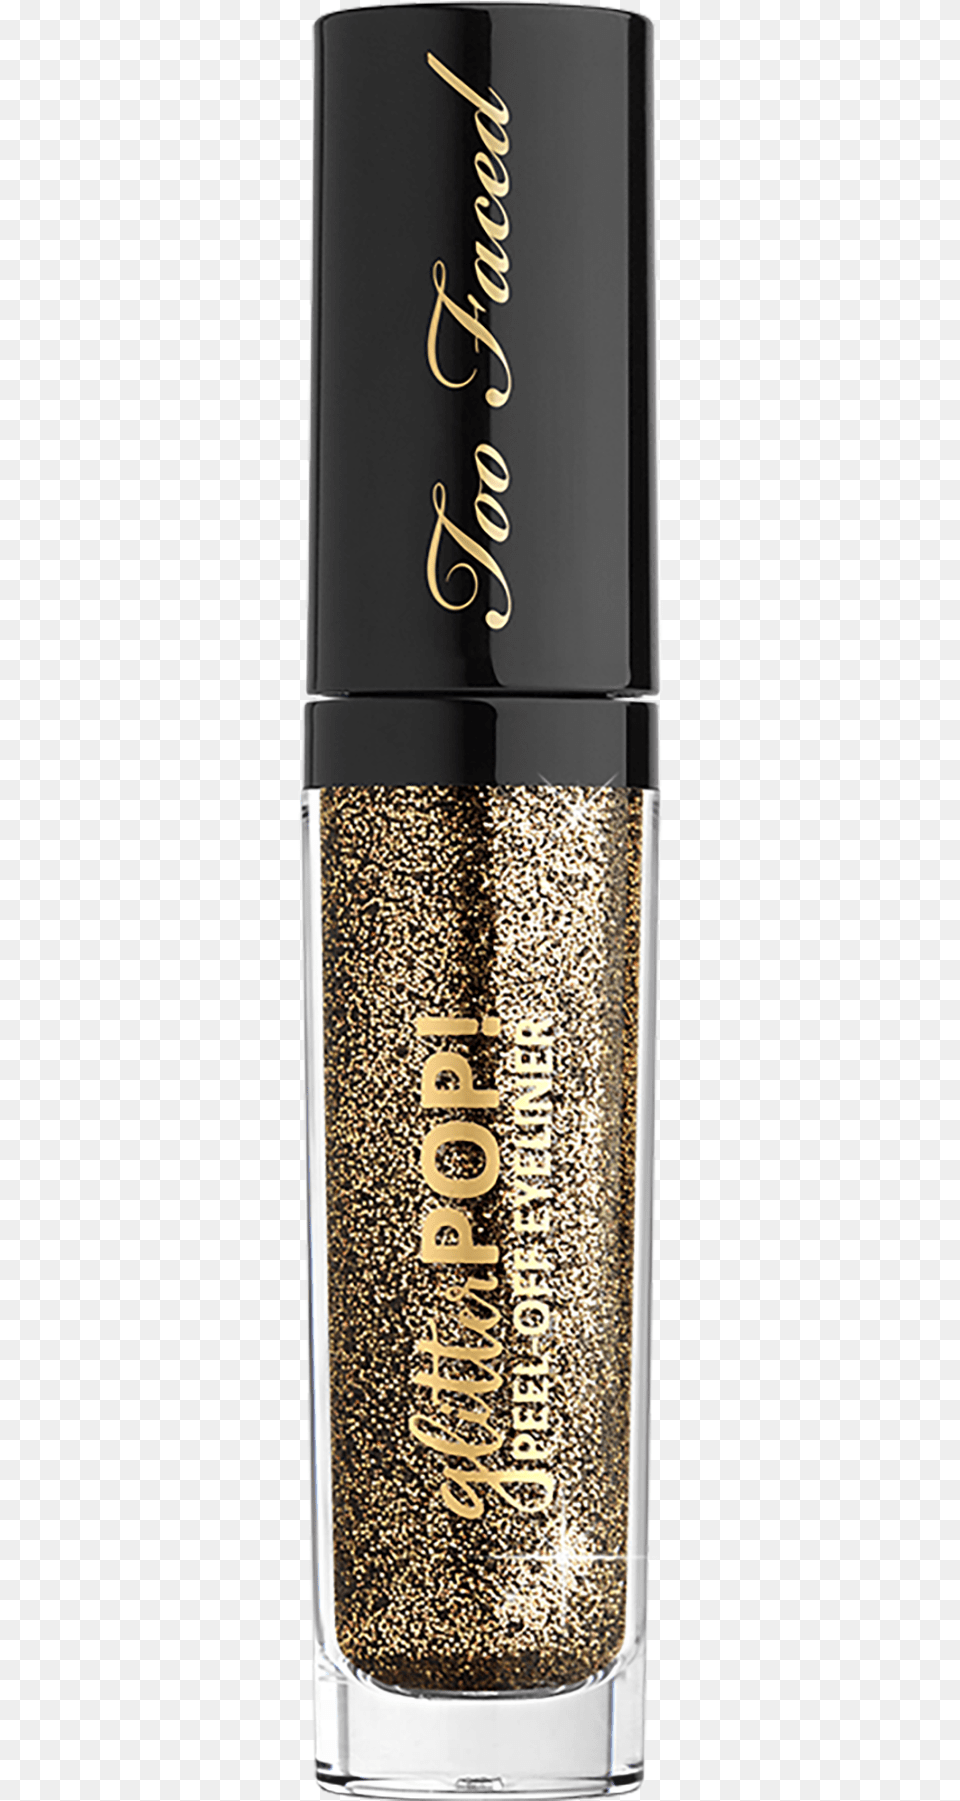 Glitter Too Faced Glitter Pop Peel Off Eyeliner, Cosmetics Png Image